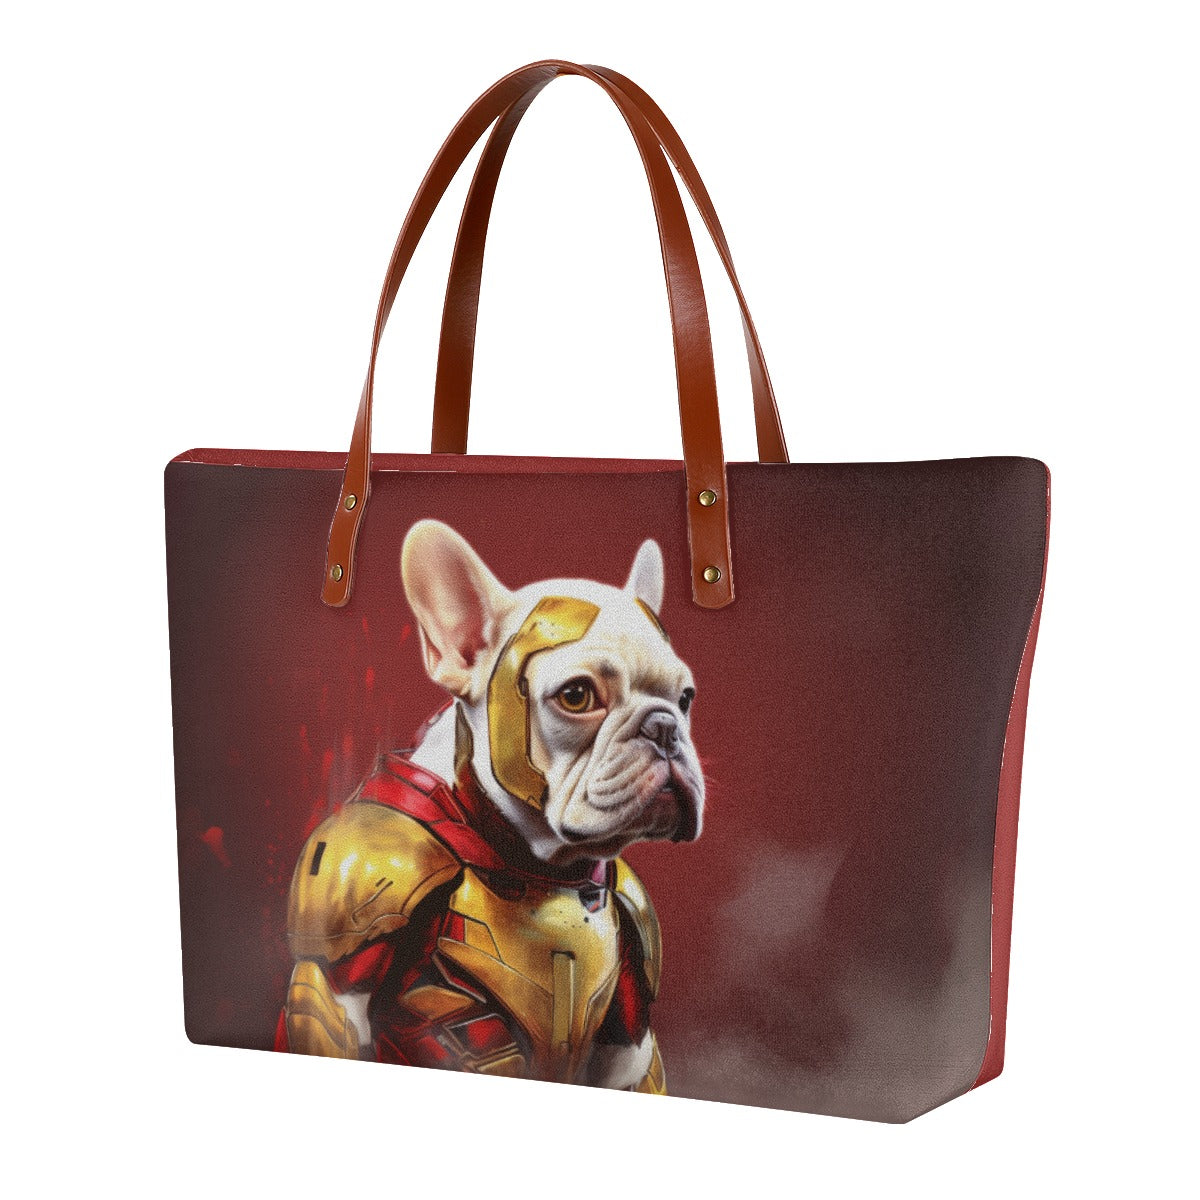 Women's Frenchie Tote Bag - Chic Canine Accessory